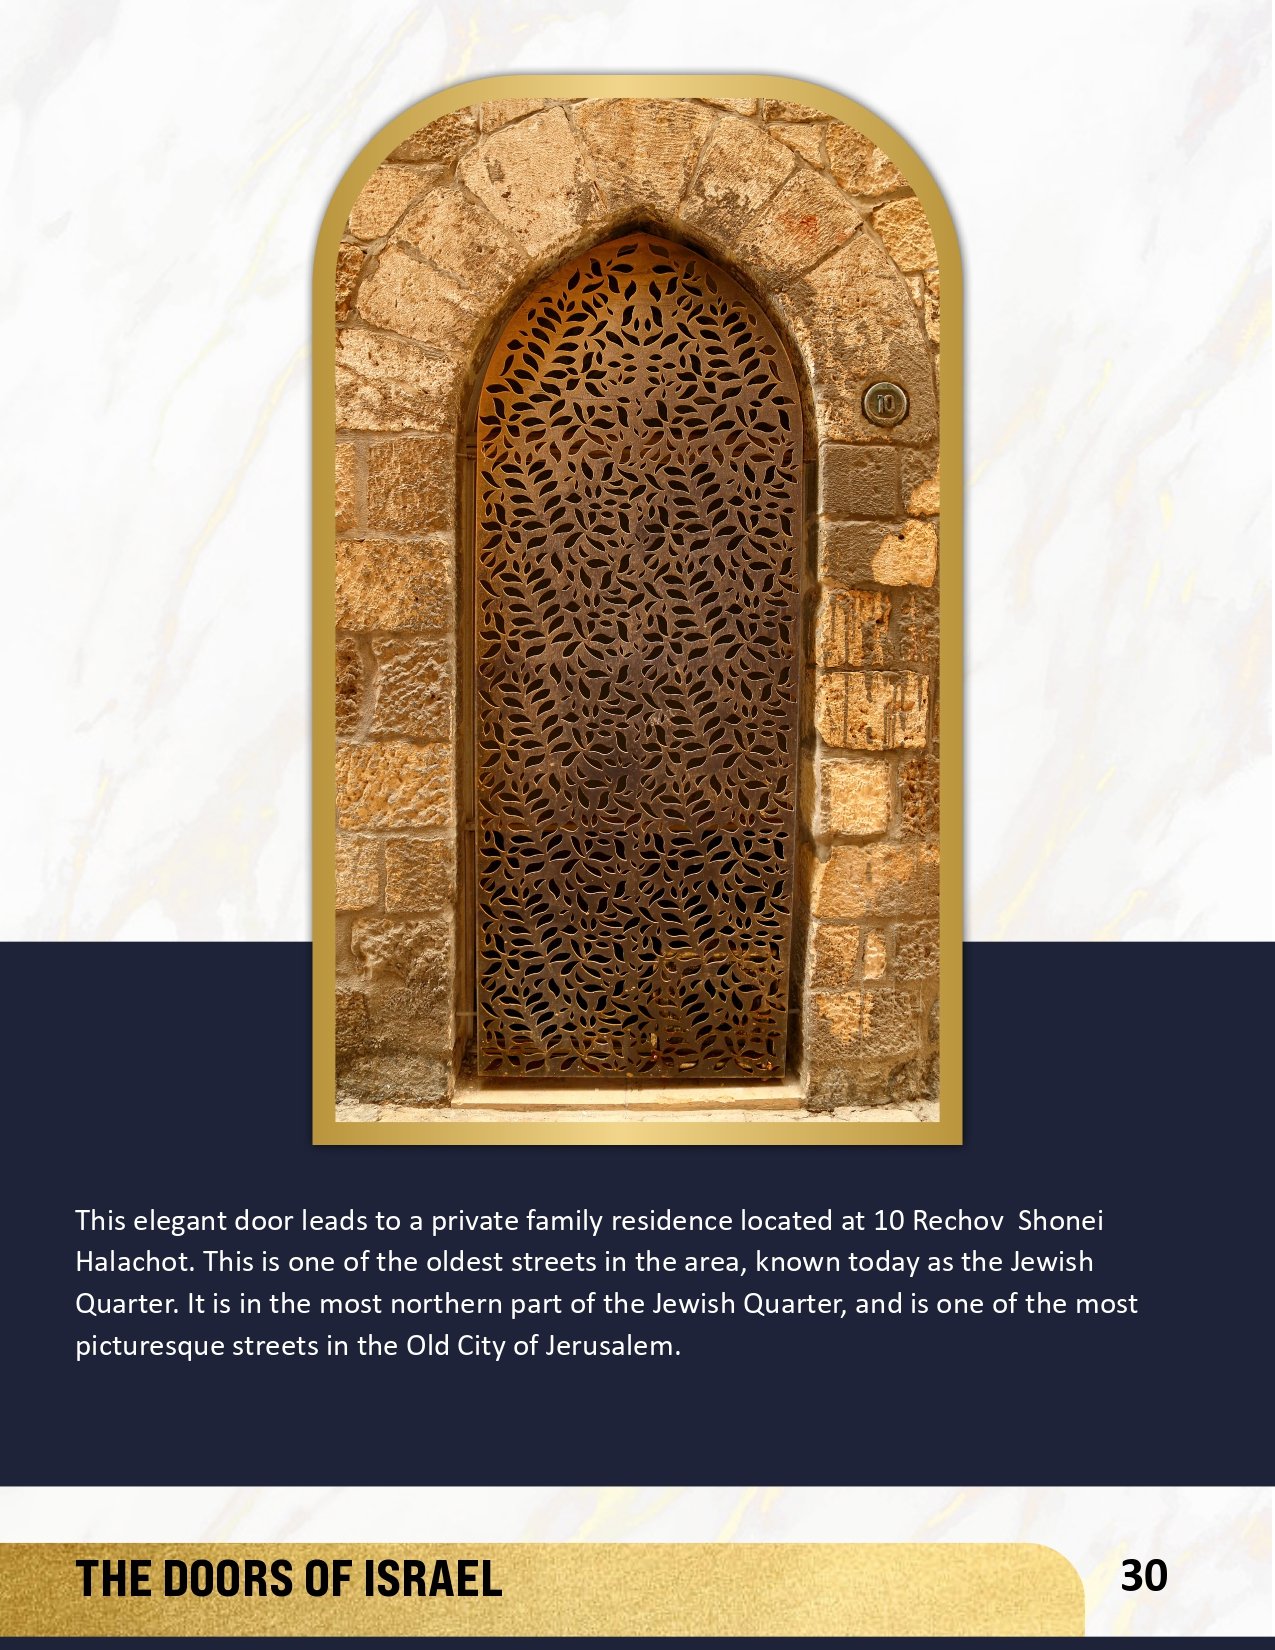 THE DOORS OF ISRAEL-6 INSIDE TEXT-30_page-0001.jpg